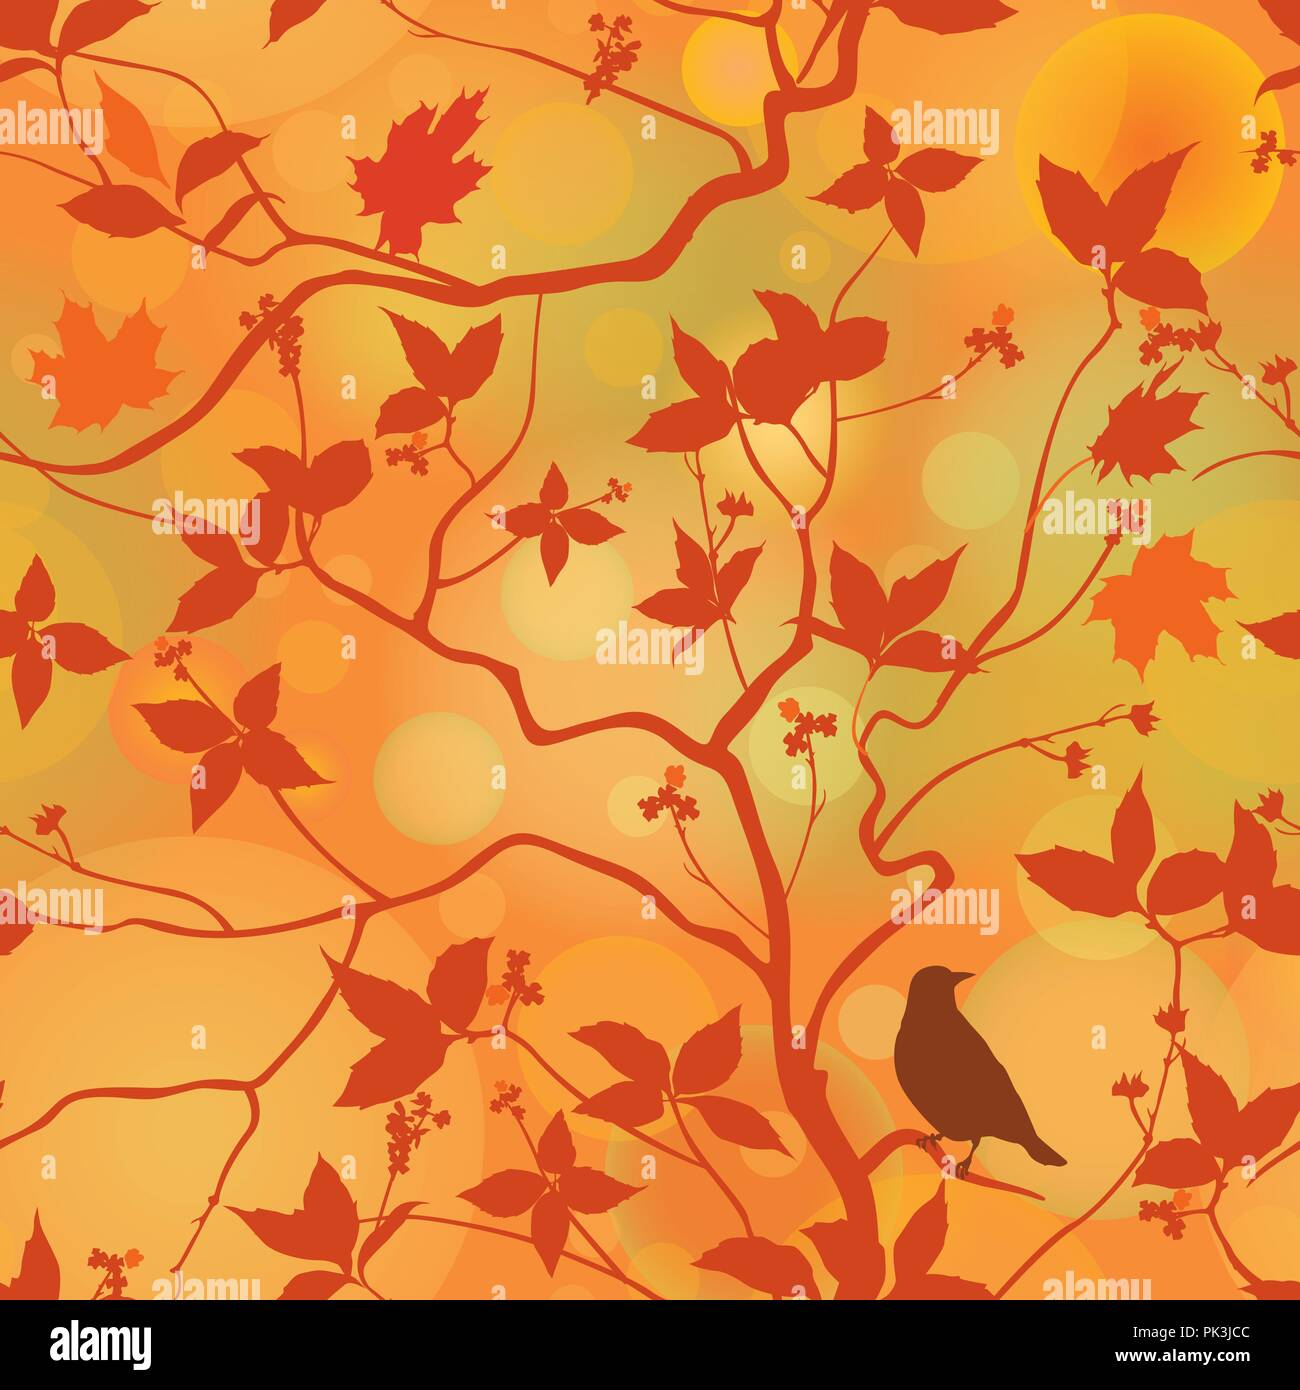 Fall leaves floral seamless pattern. Autumn forest background with bird on branch Stock Vector